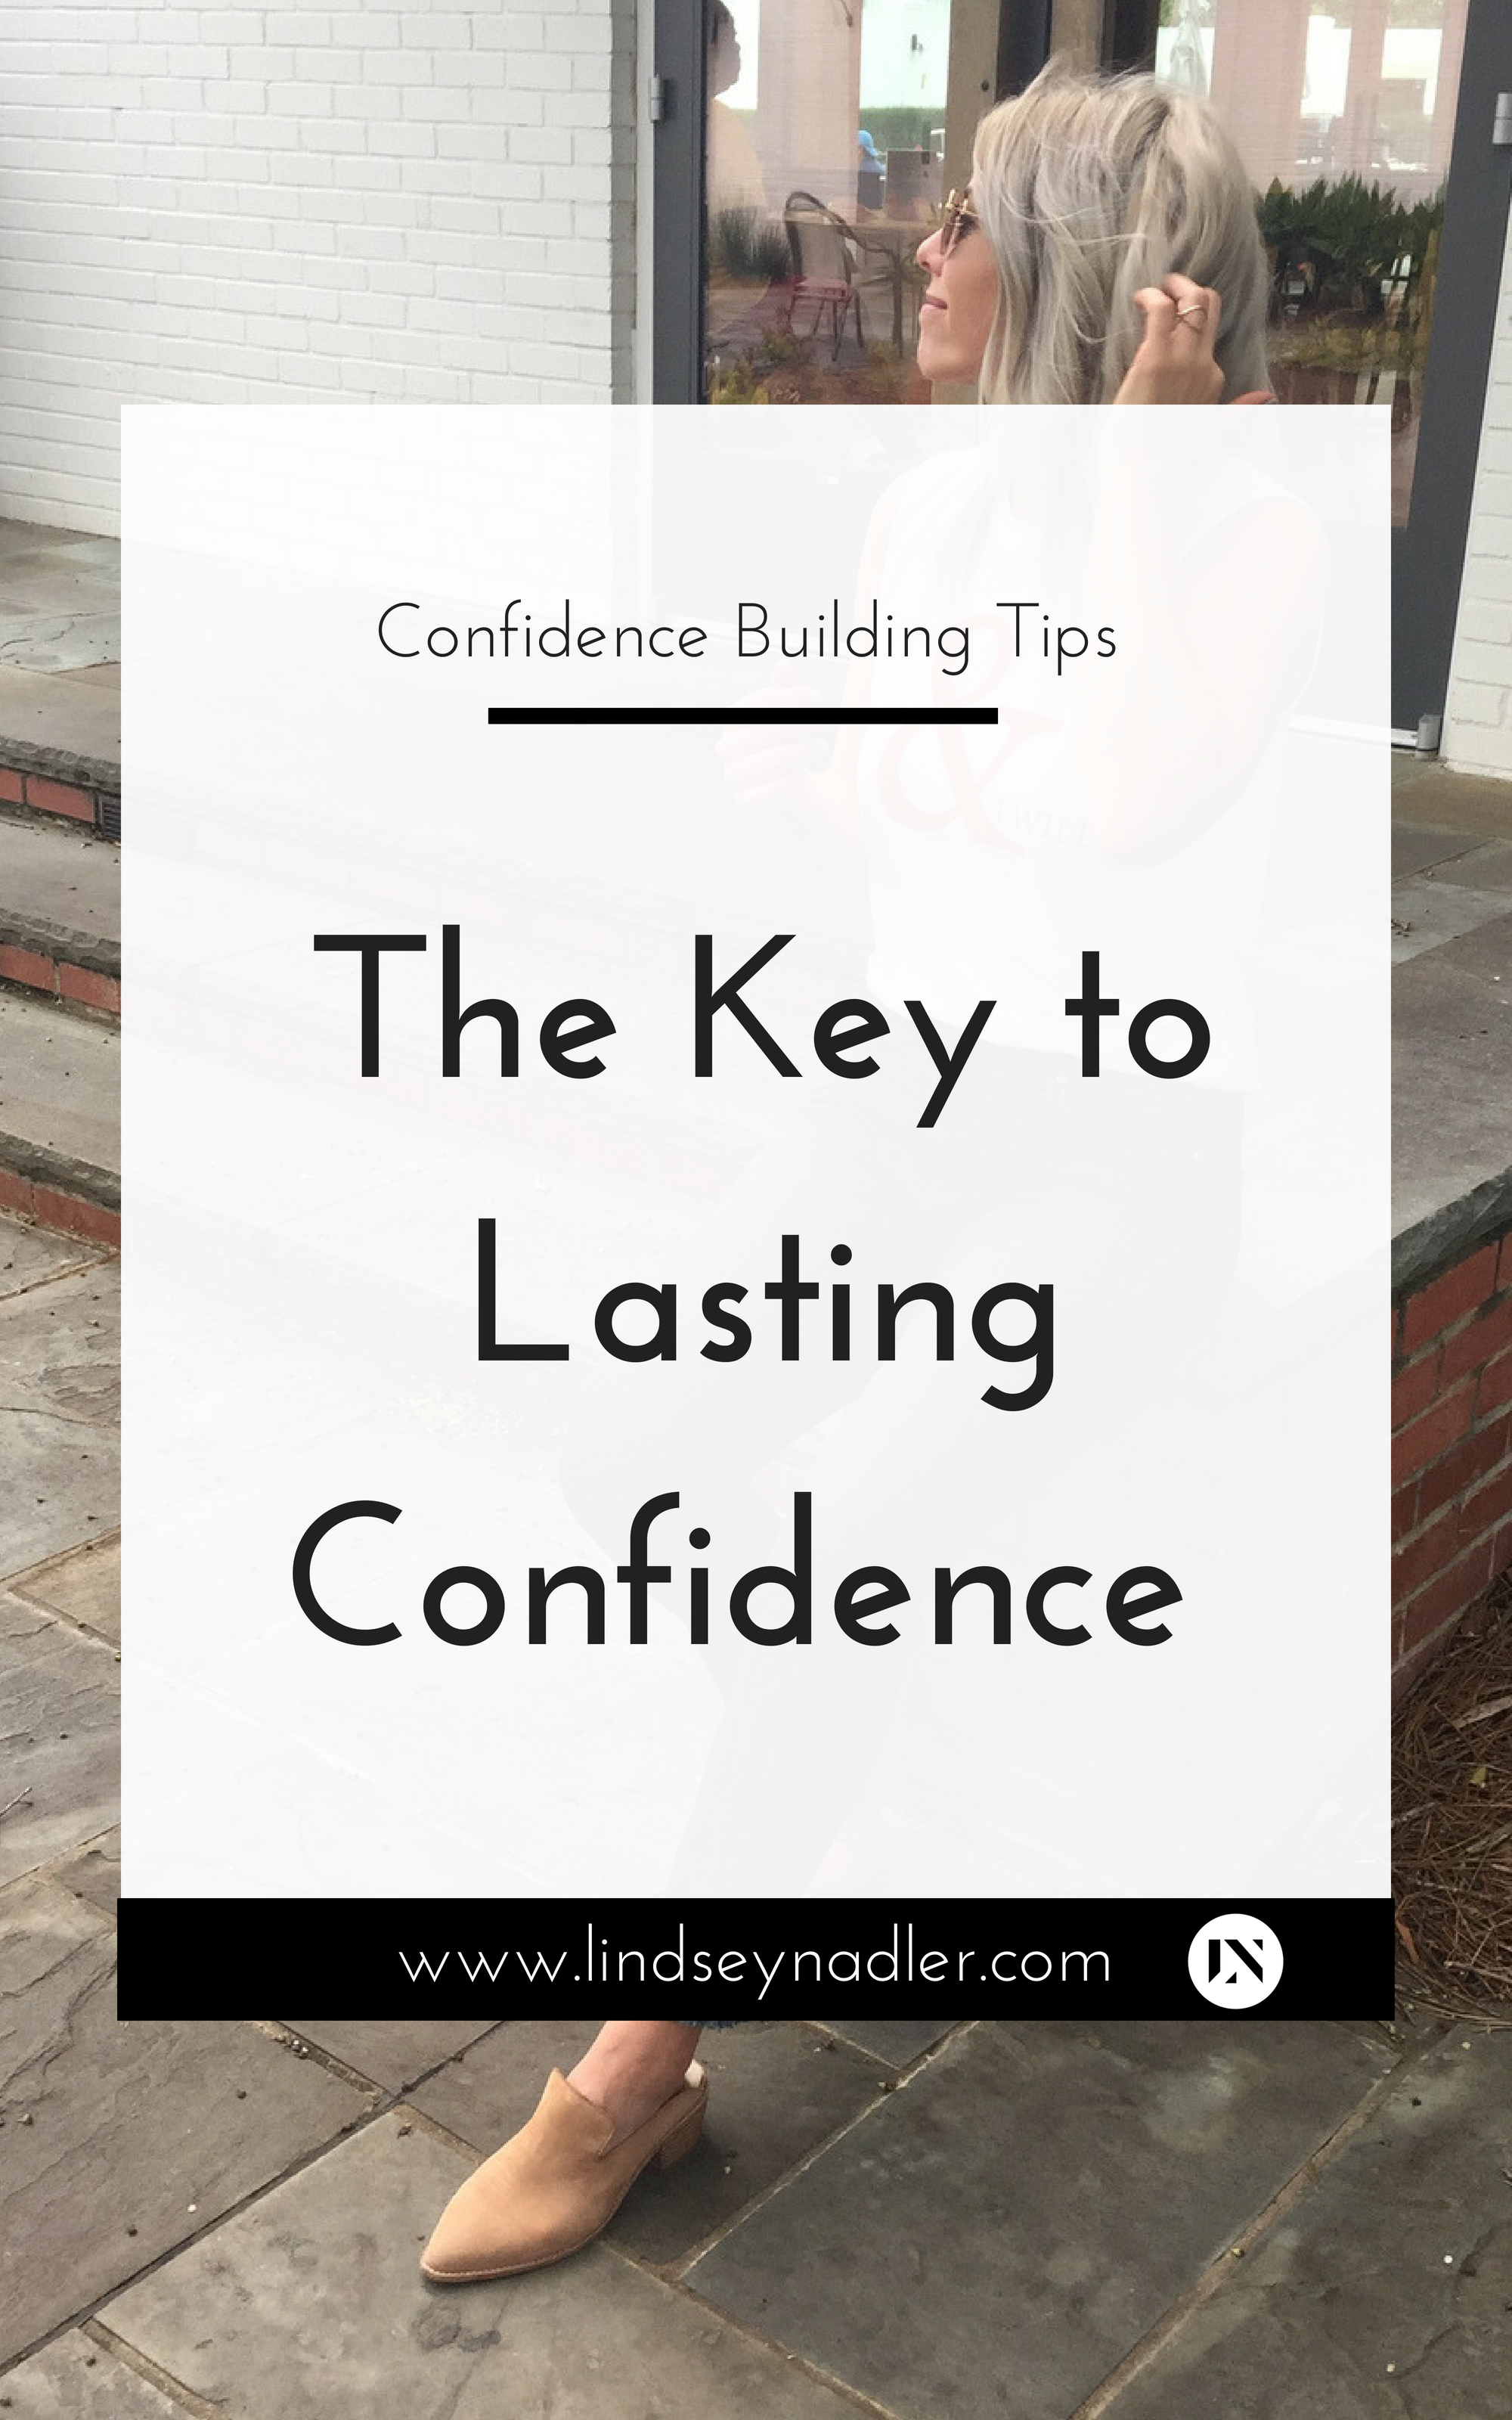 The Key to Lasting Confidence